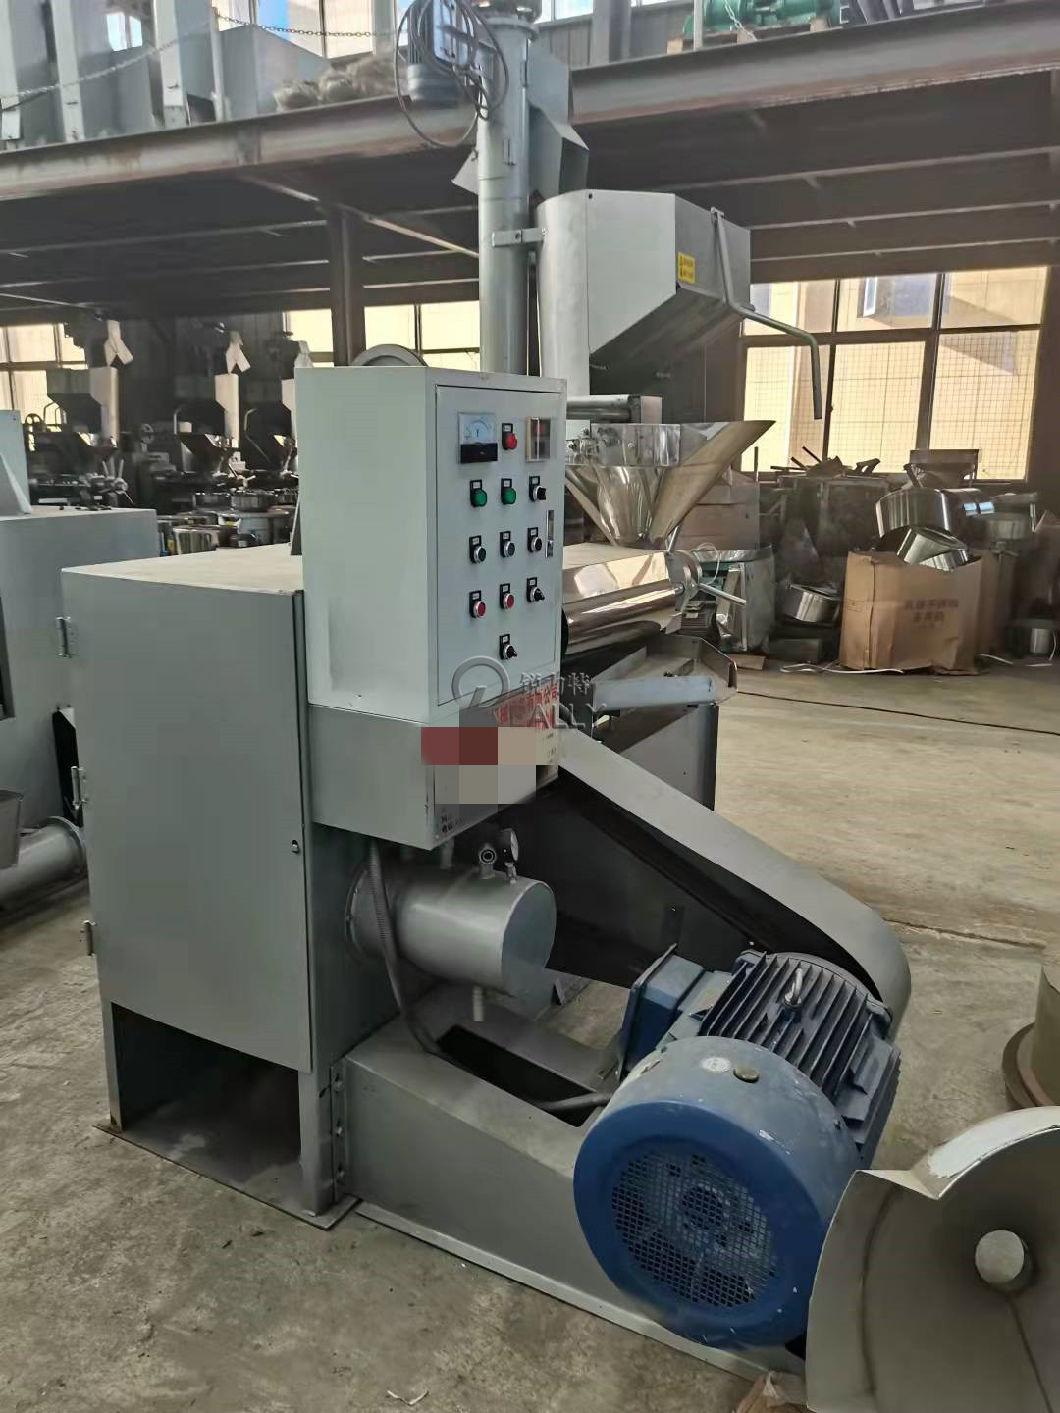 Screw Olive Oil Press Machine Automatic Hydraulic Cold Oil Extractor Sunflower Seeds Coconut Sesame Peanut Palm Kernel Oil Expeller Extraction Making Machine